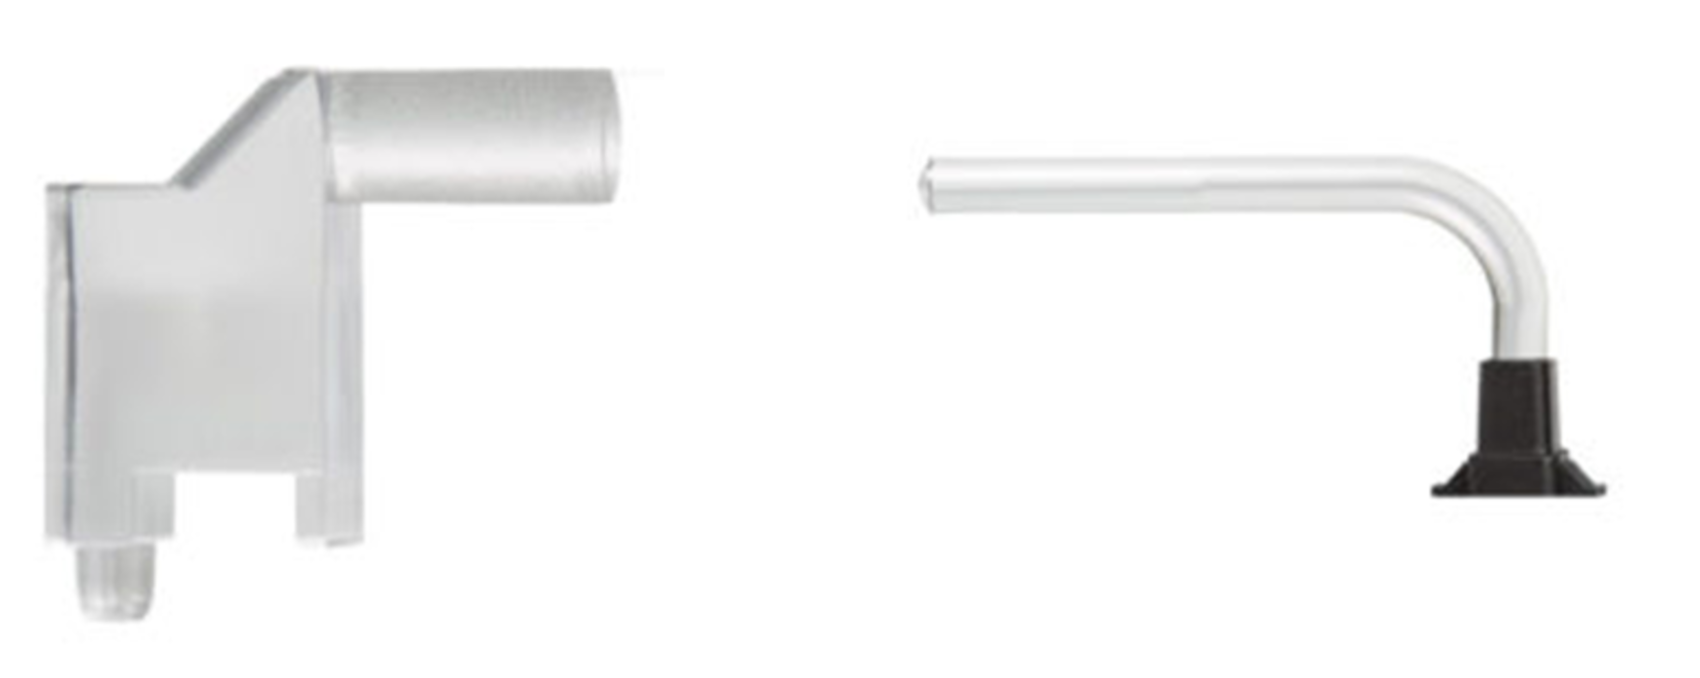 Figure 1: Rigid light pipes can redirect light using prisms (left) or lower-loss curves (right). [Source: Bivar]